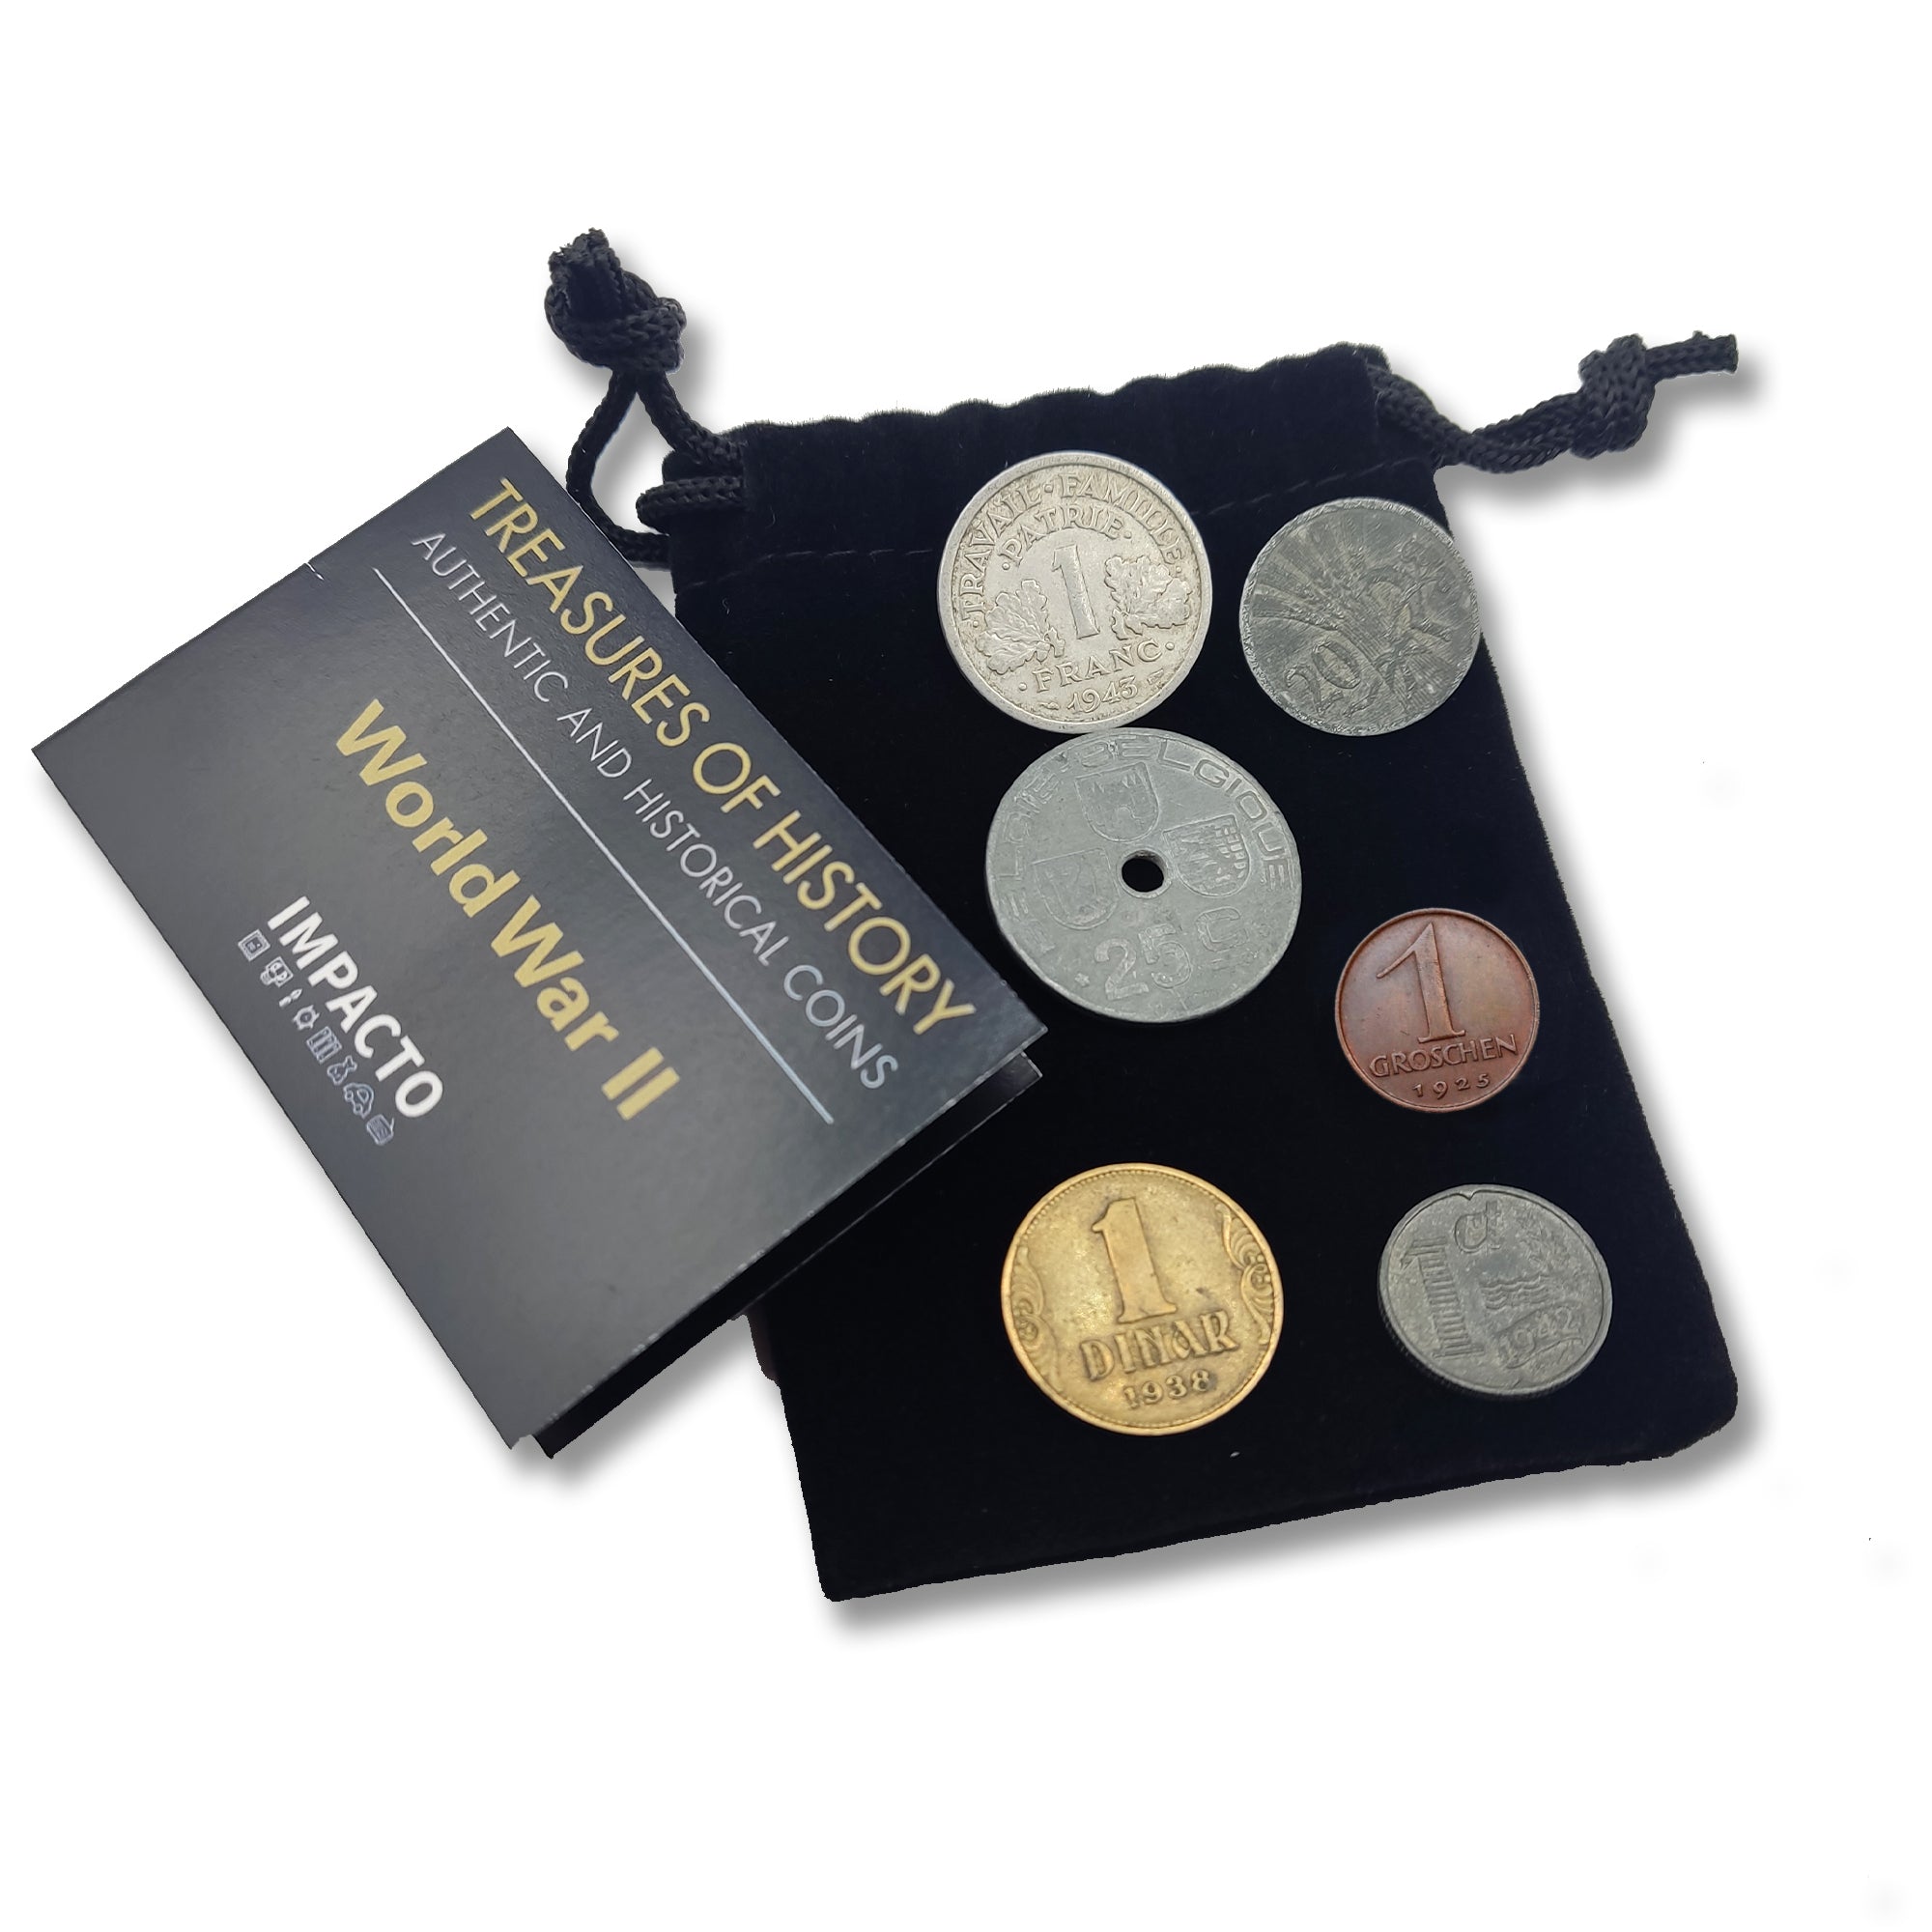 WW2 World Currency - 6 Coins Used During The World War 2 by The Germans in The Territories They Occupied (1925-1945). Special WW2 Memorabilia for Collector, Certificate of Authenticity Included.